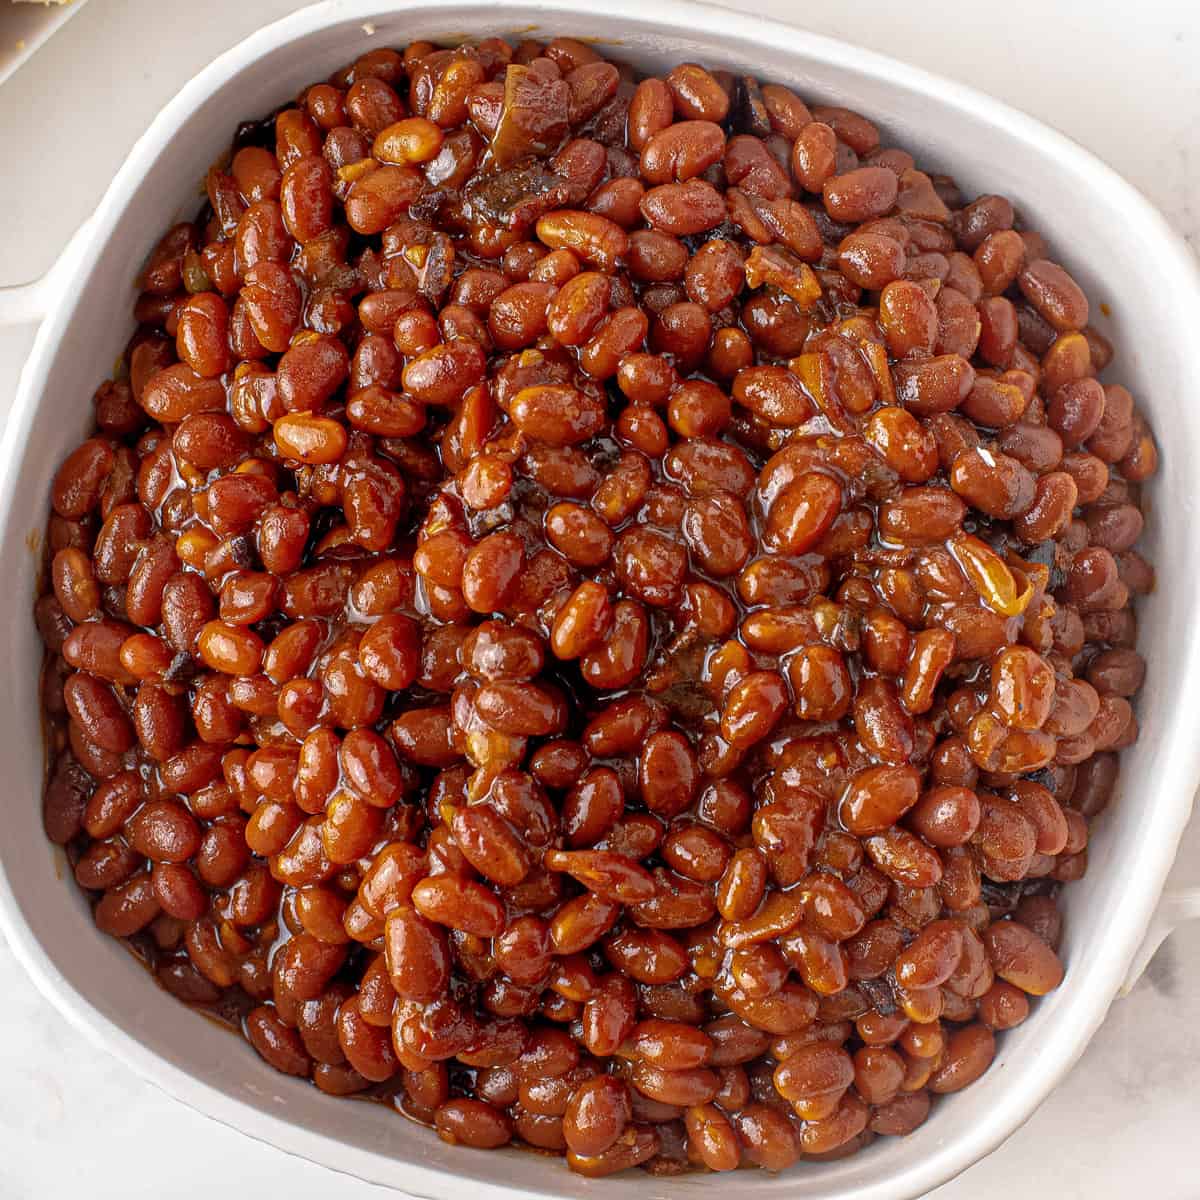 HOW TO COOK DRIED BEANS IN AN INSTANT POT OR ELECTRIC PRESSURE